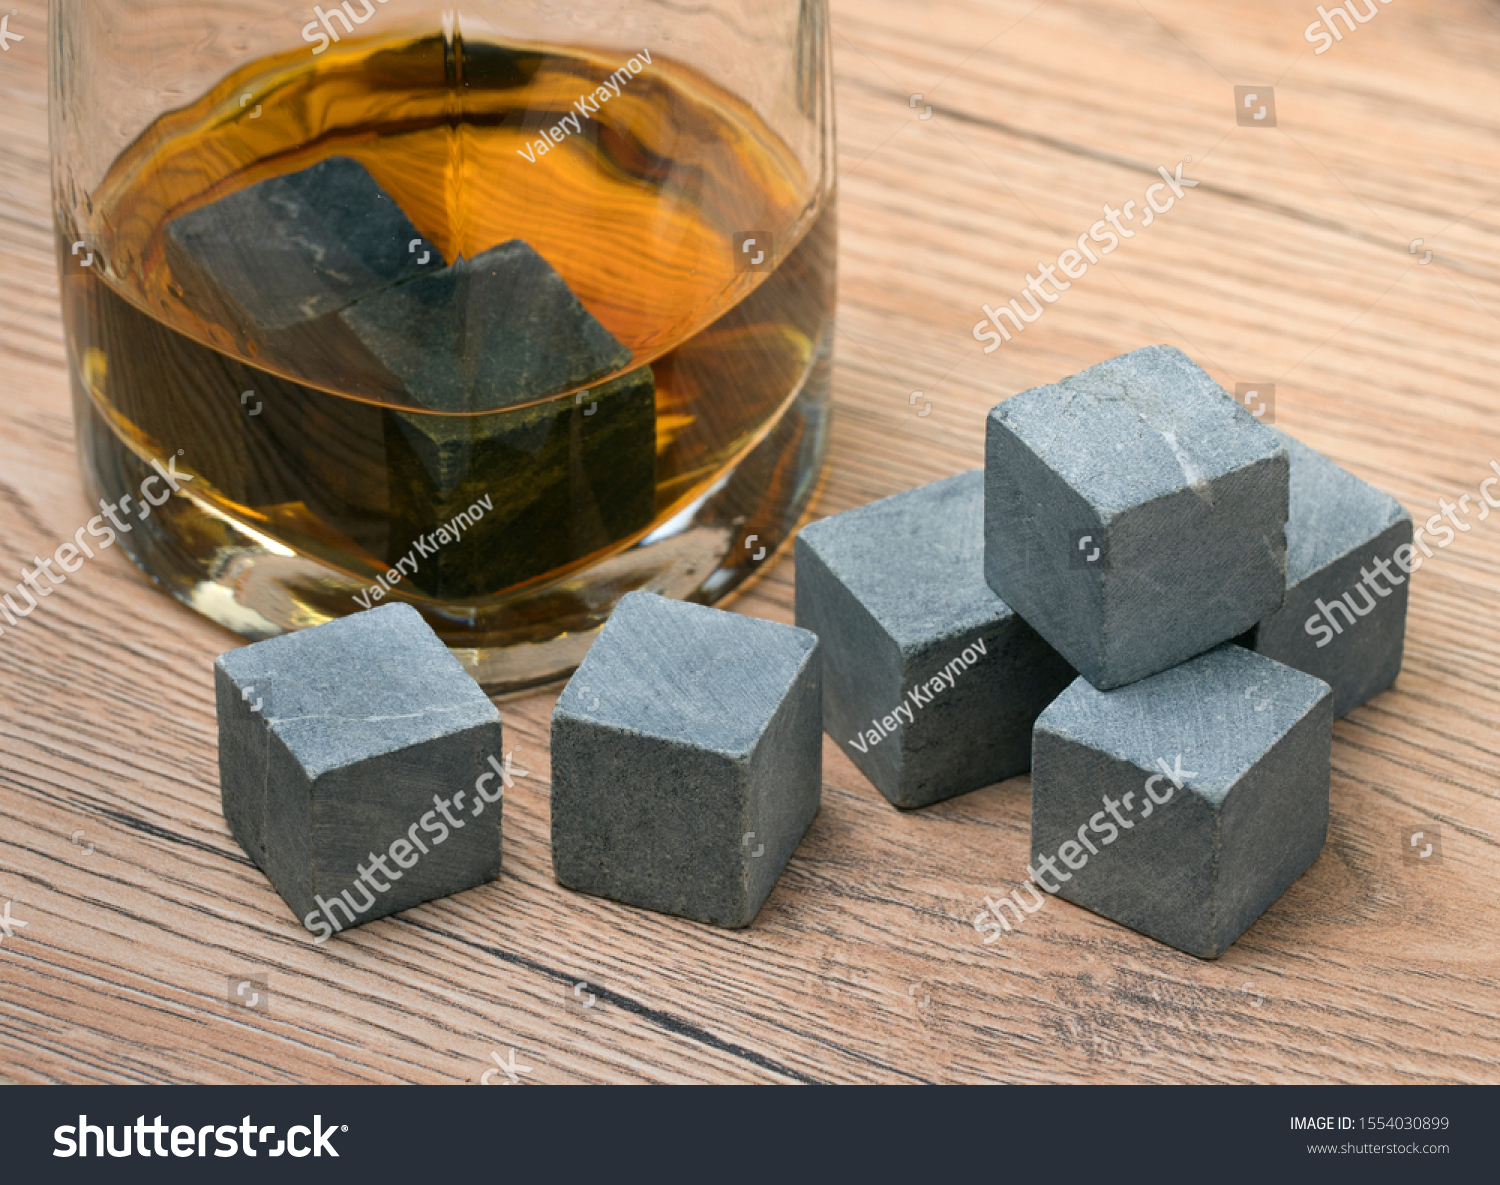 Glass with whiskey and whiskey stones on wooden background #1554030899